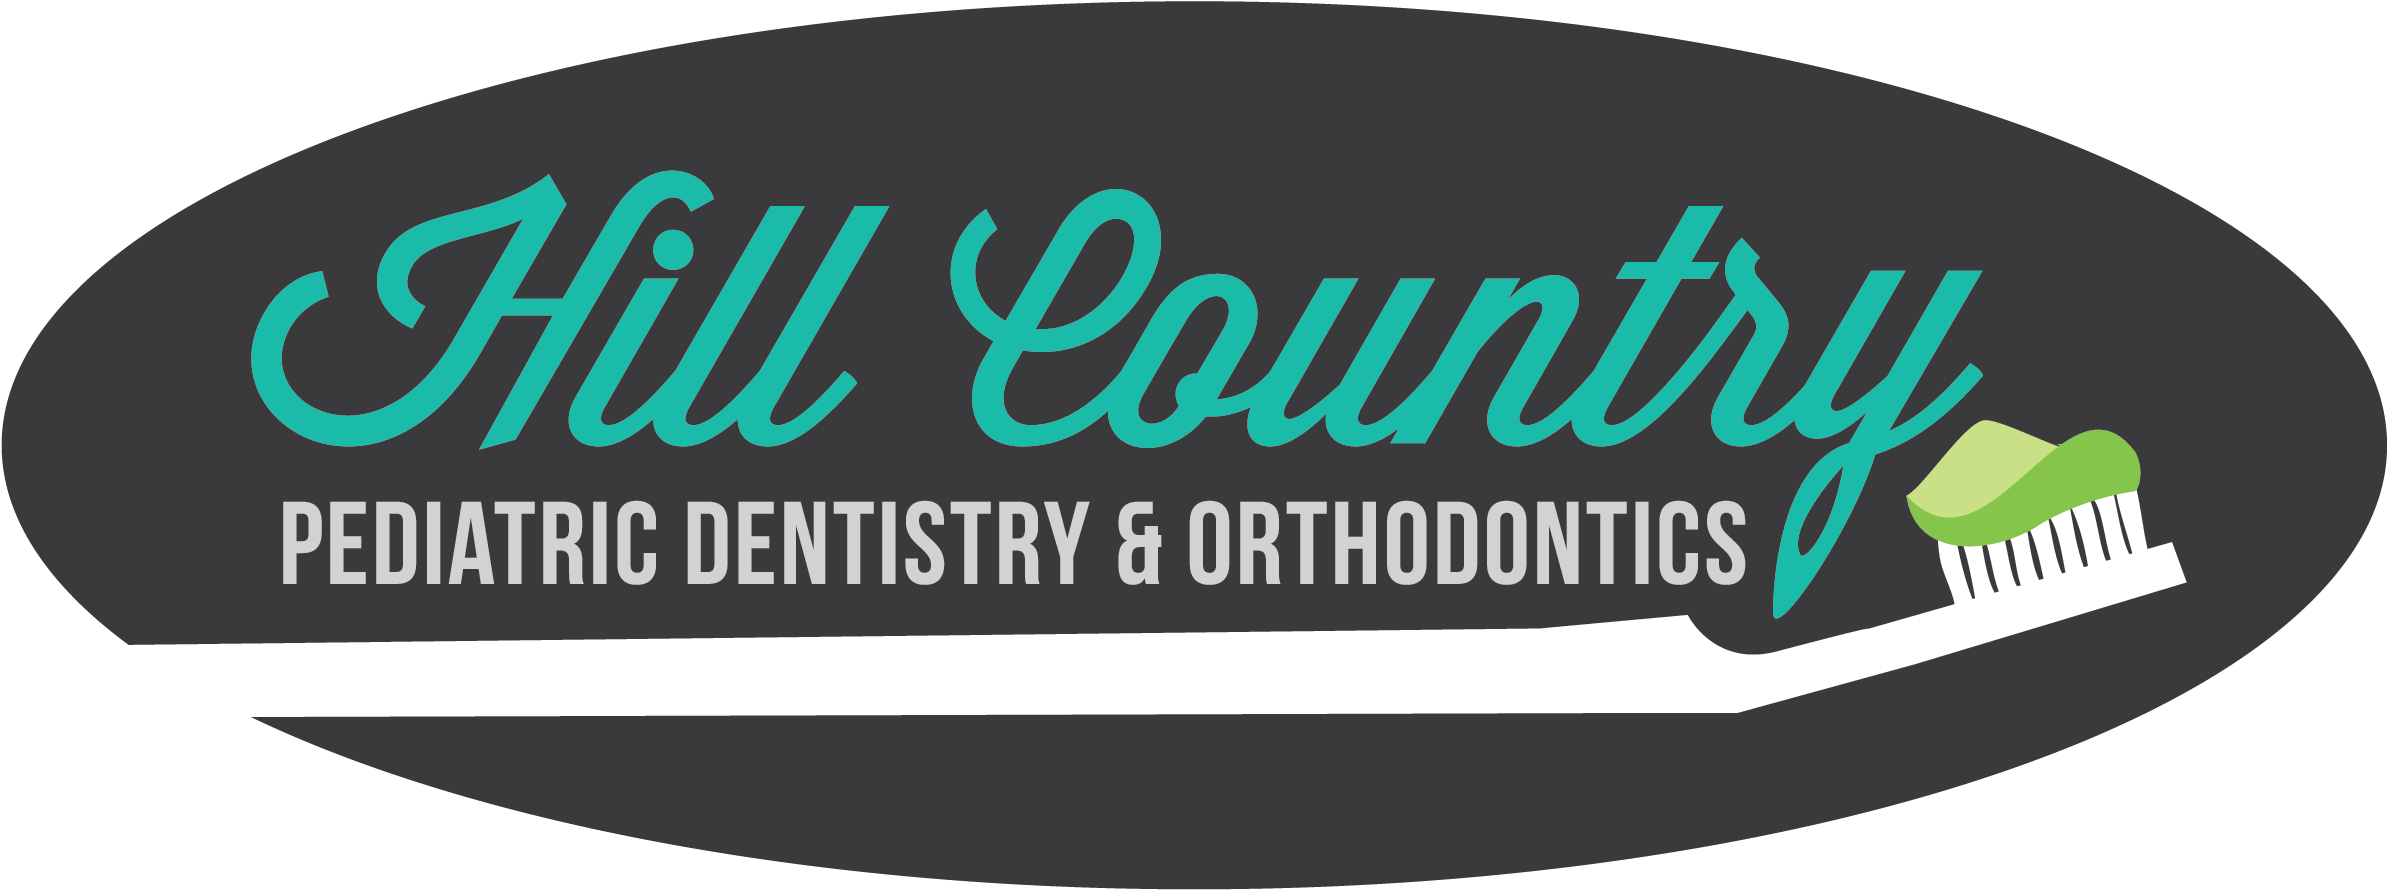 Hill Country Pediatric Dentistry & Orthodontics - Appbounty (2500x1250)